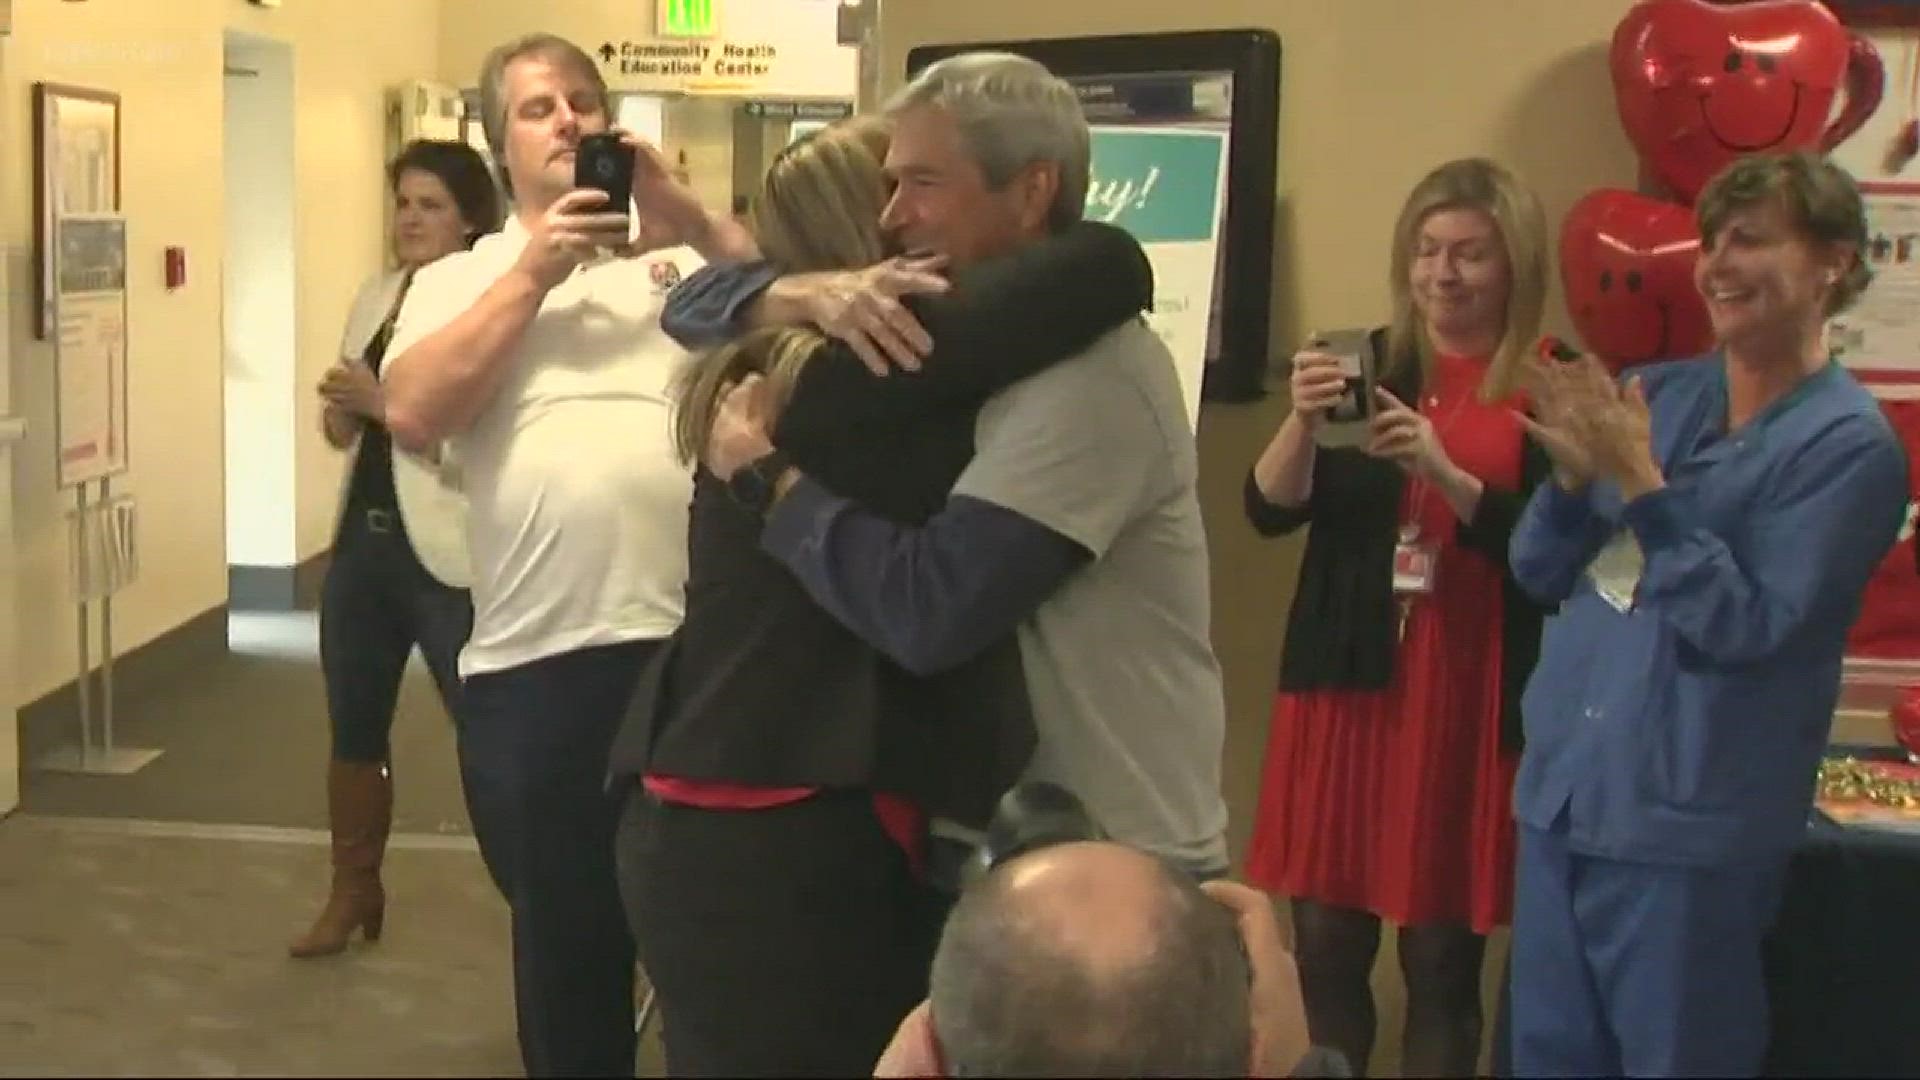 A runner and a nurse who helped him during the Portland marathon reunited.